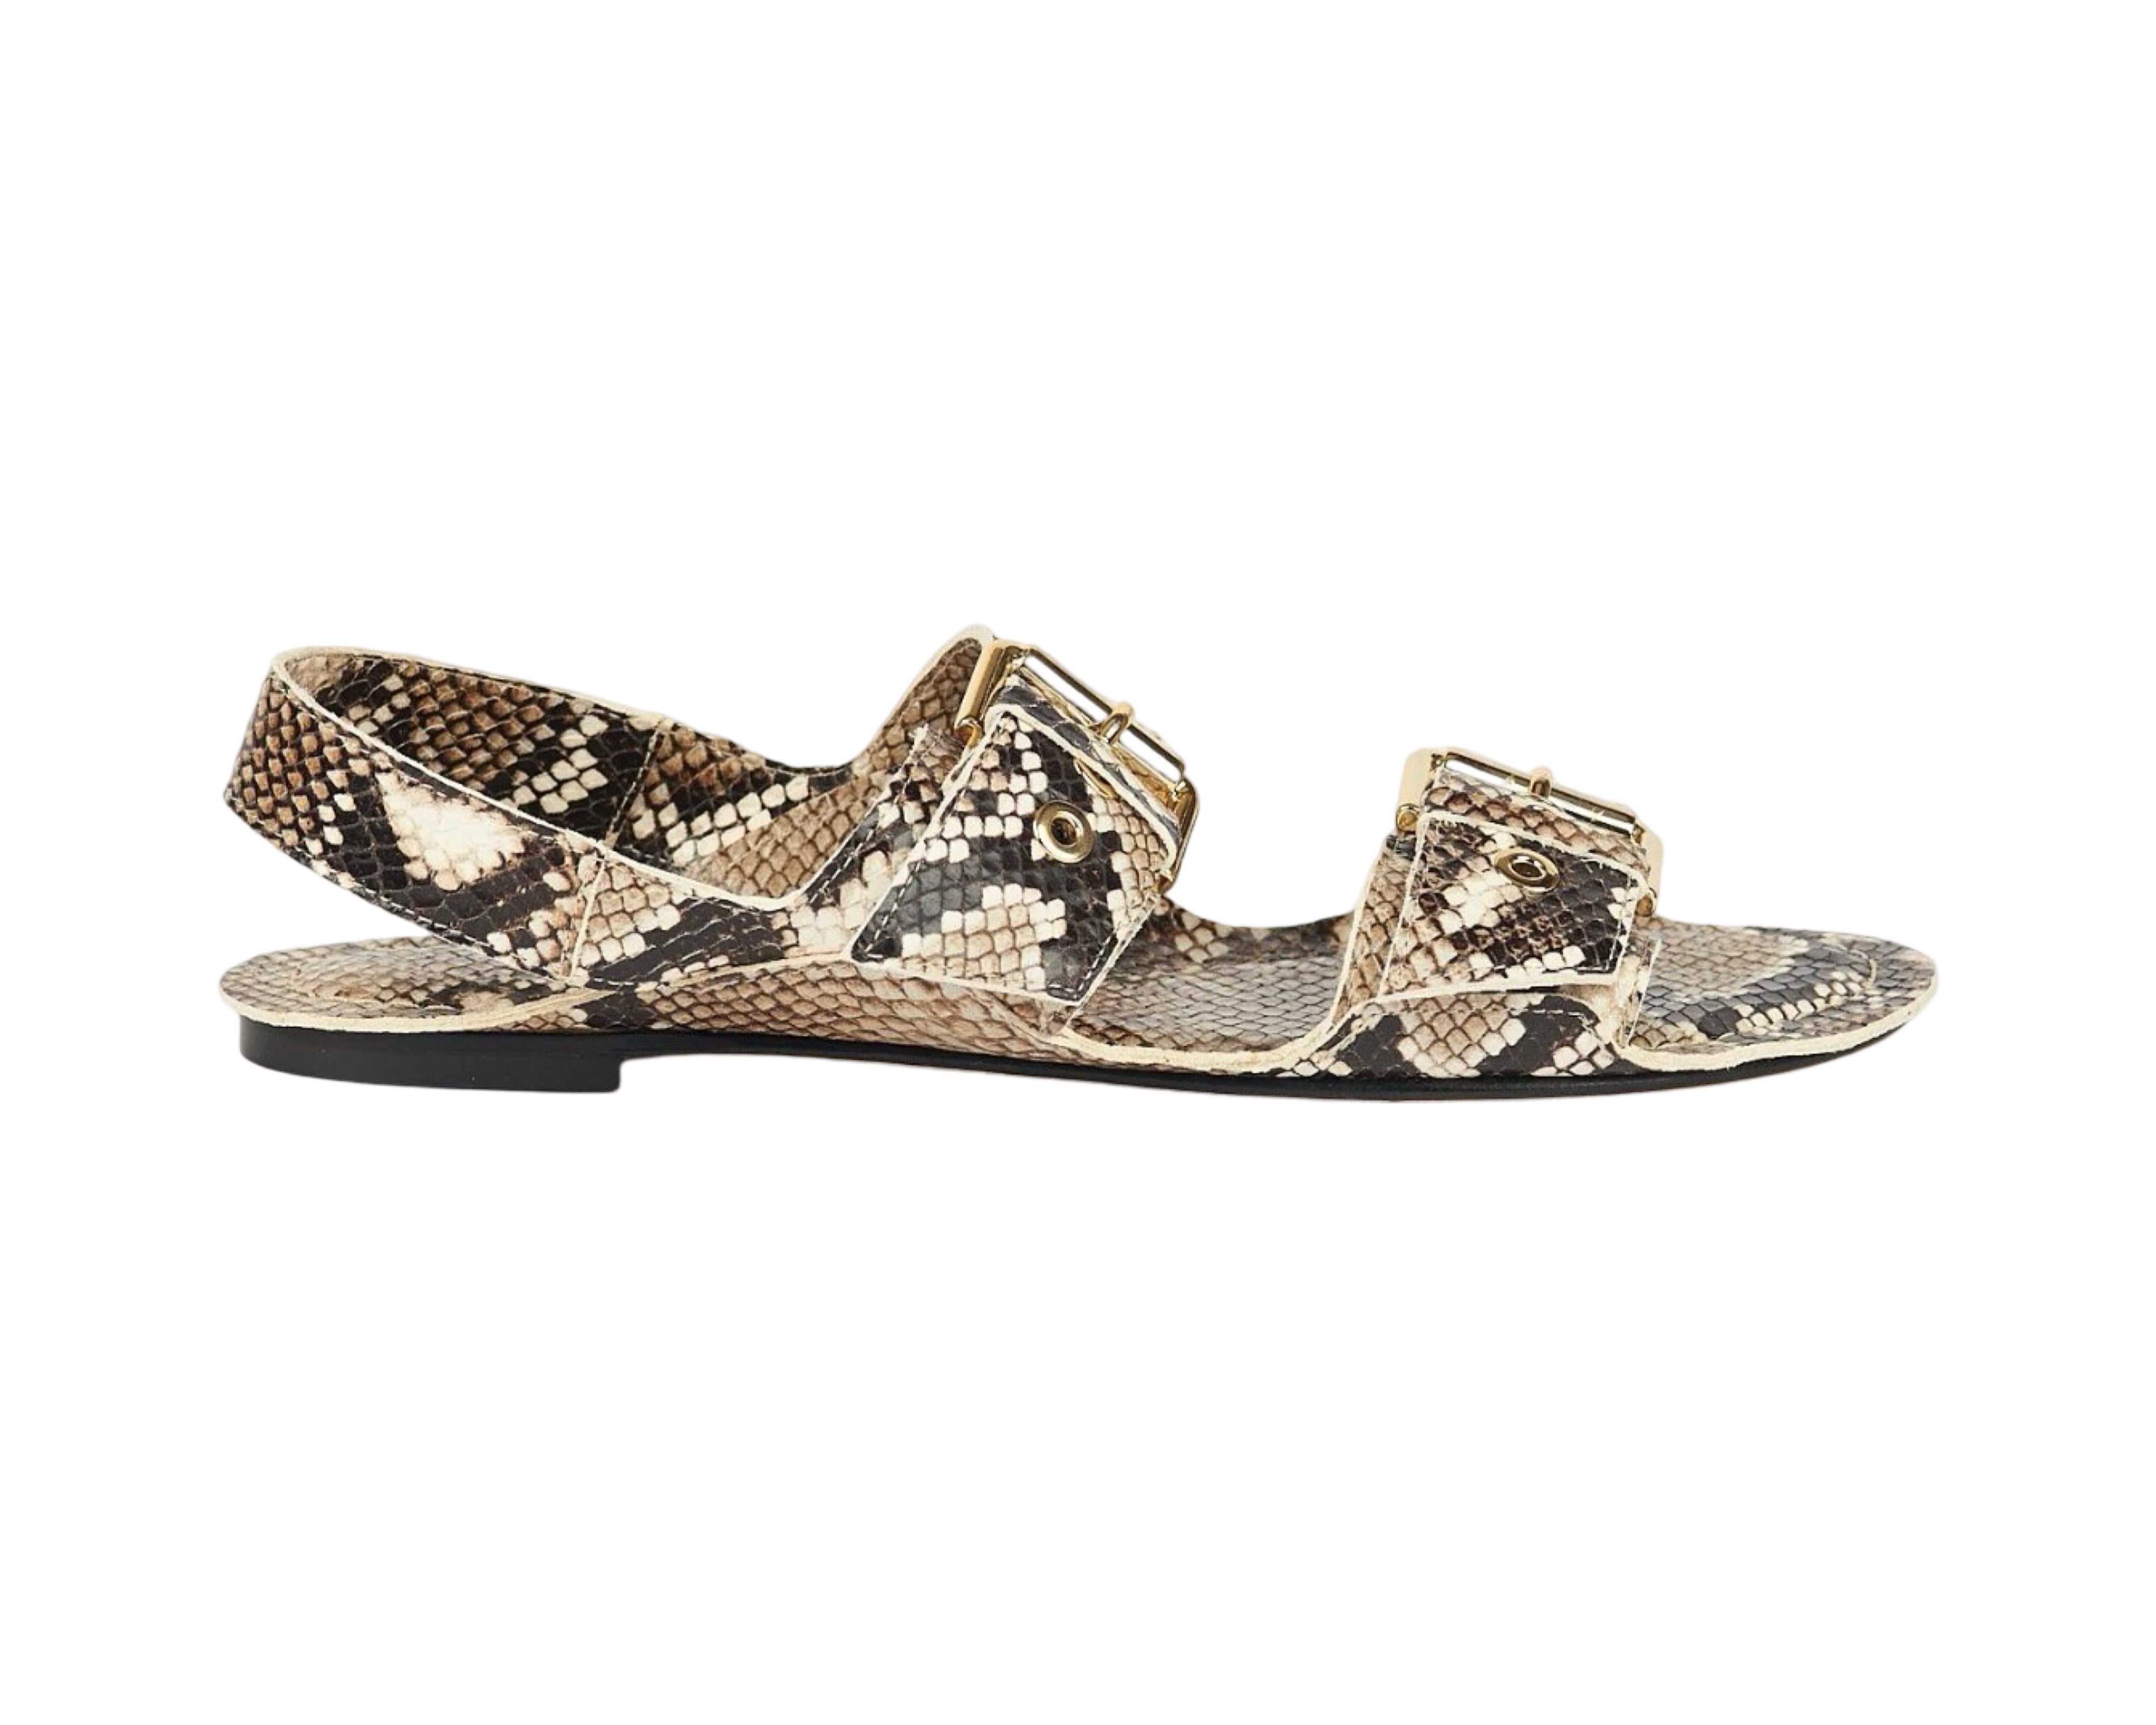 The Double Buckle Sandal in Python